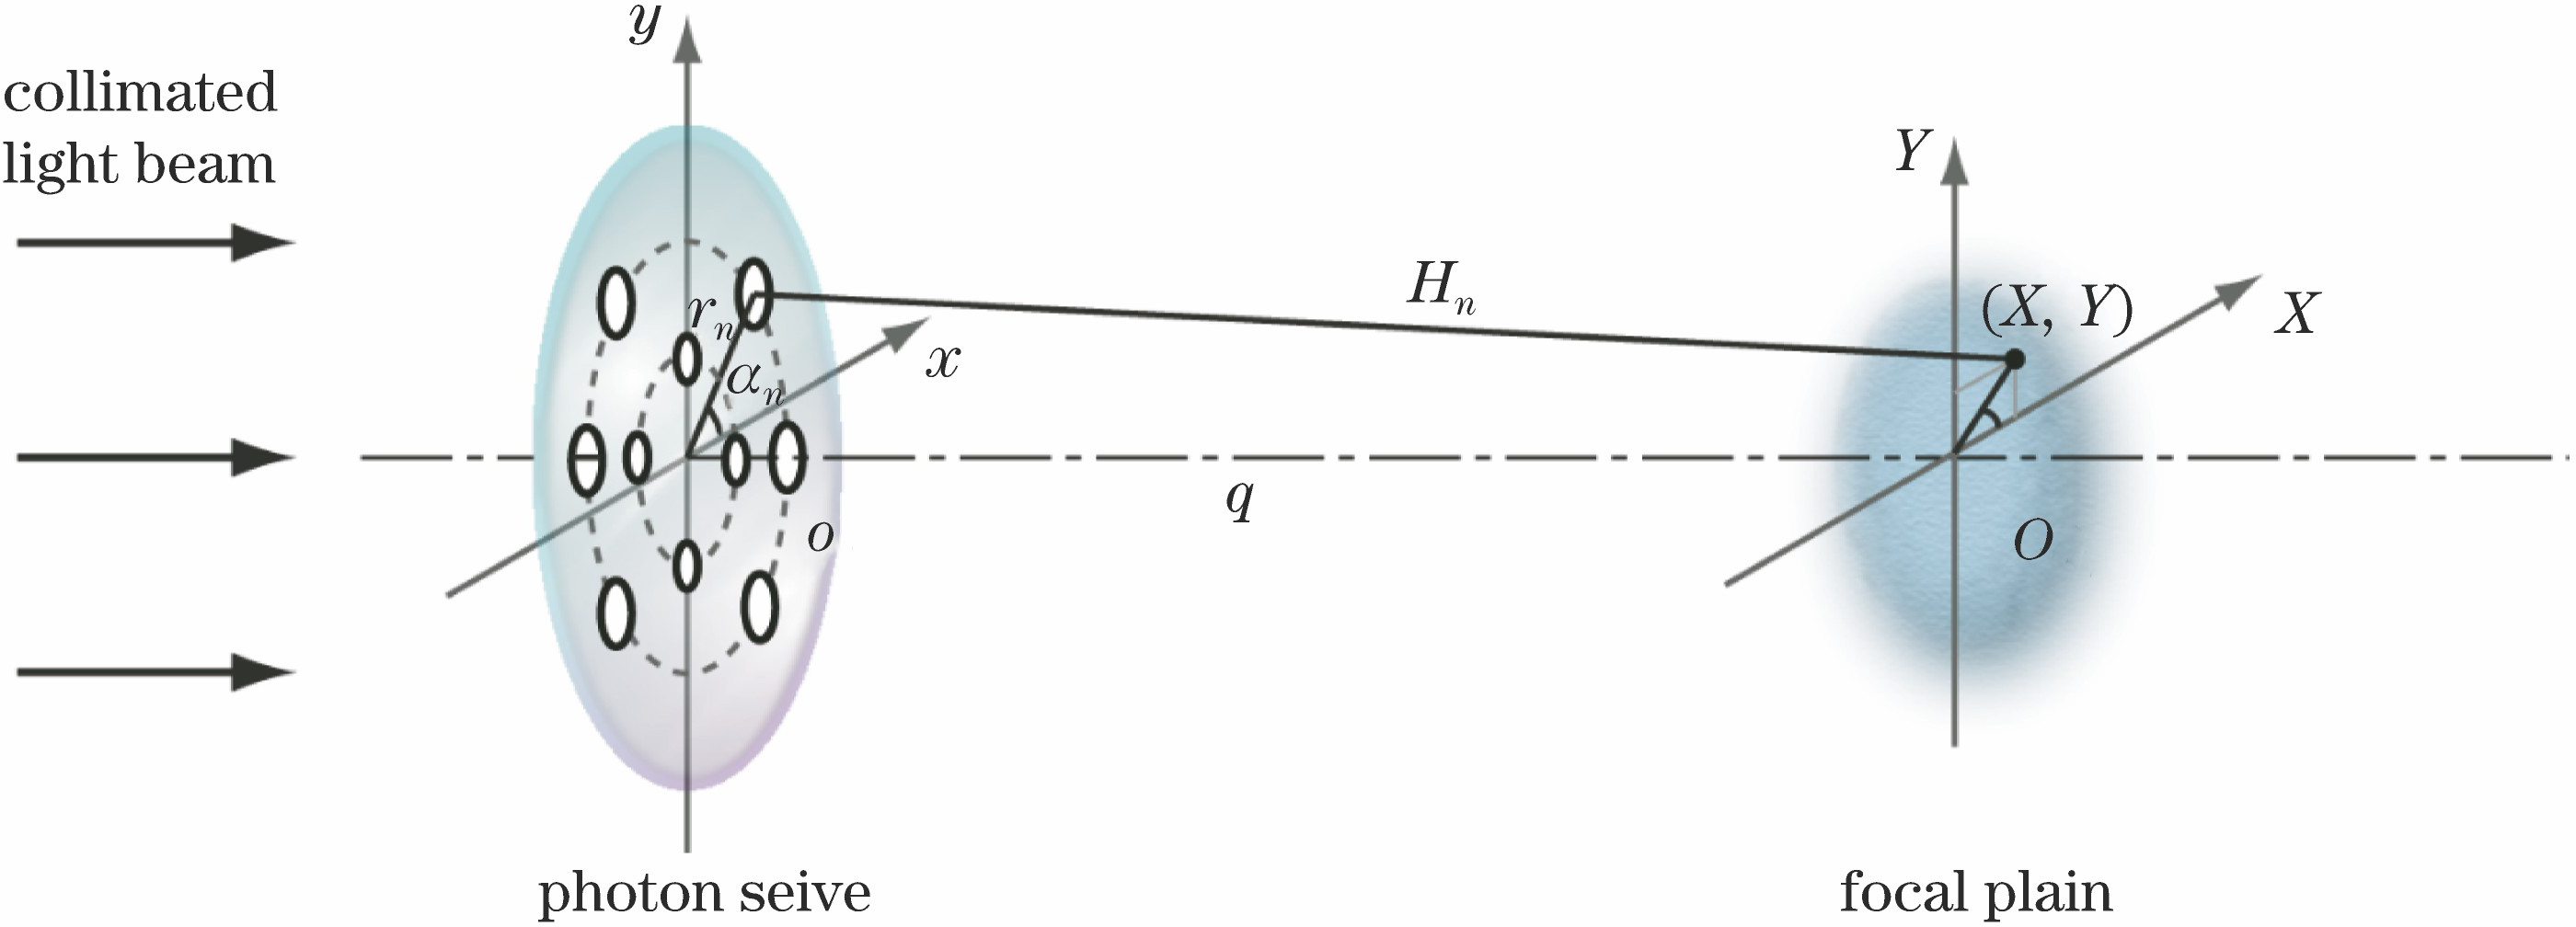 Schematic of a general photon sieve with collimated incident light beam